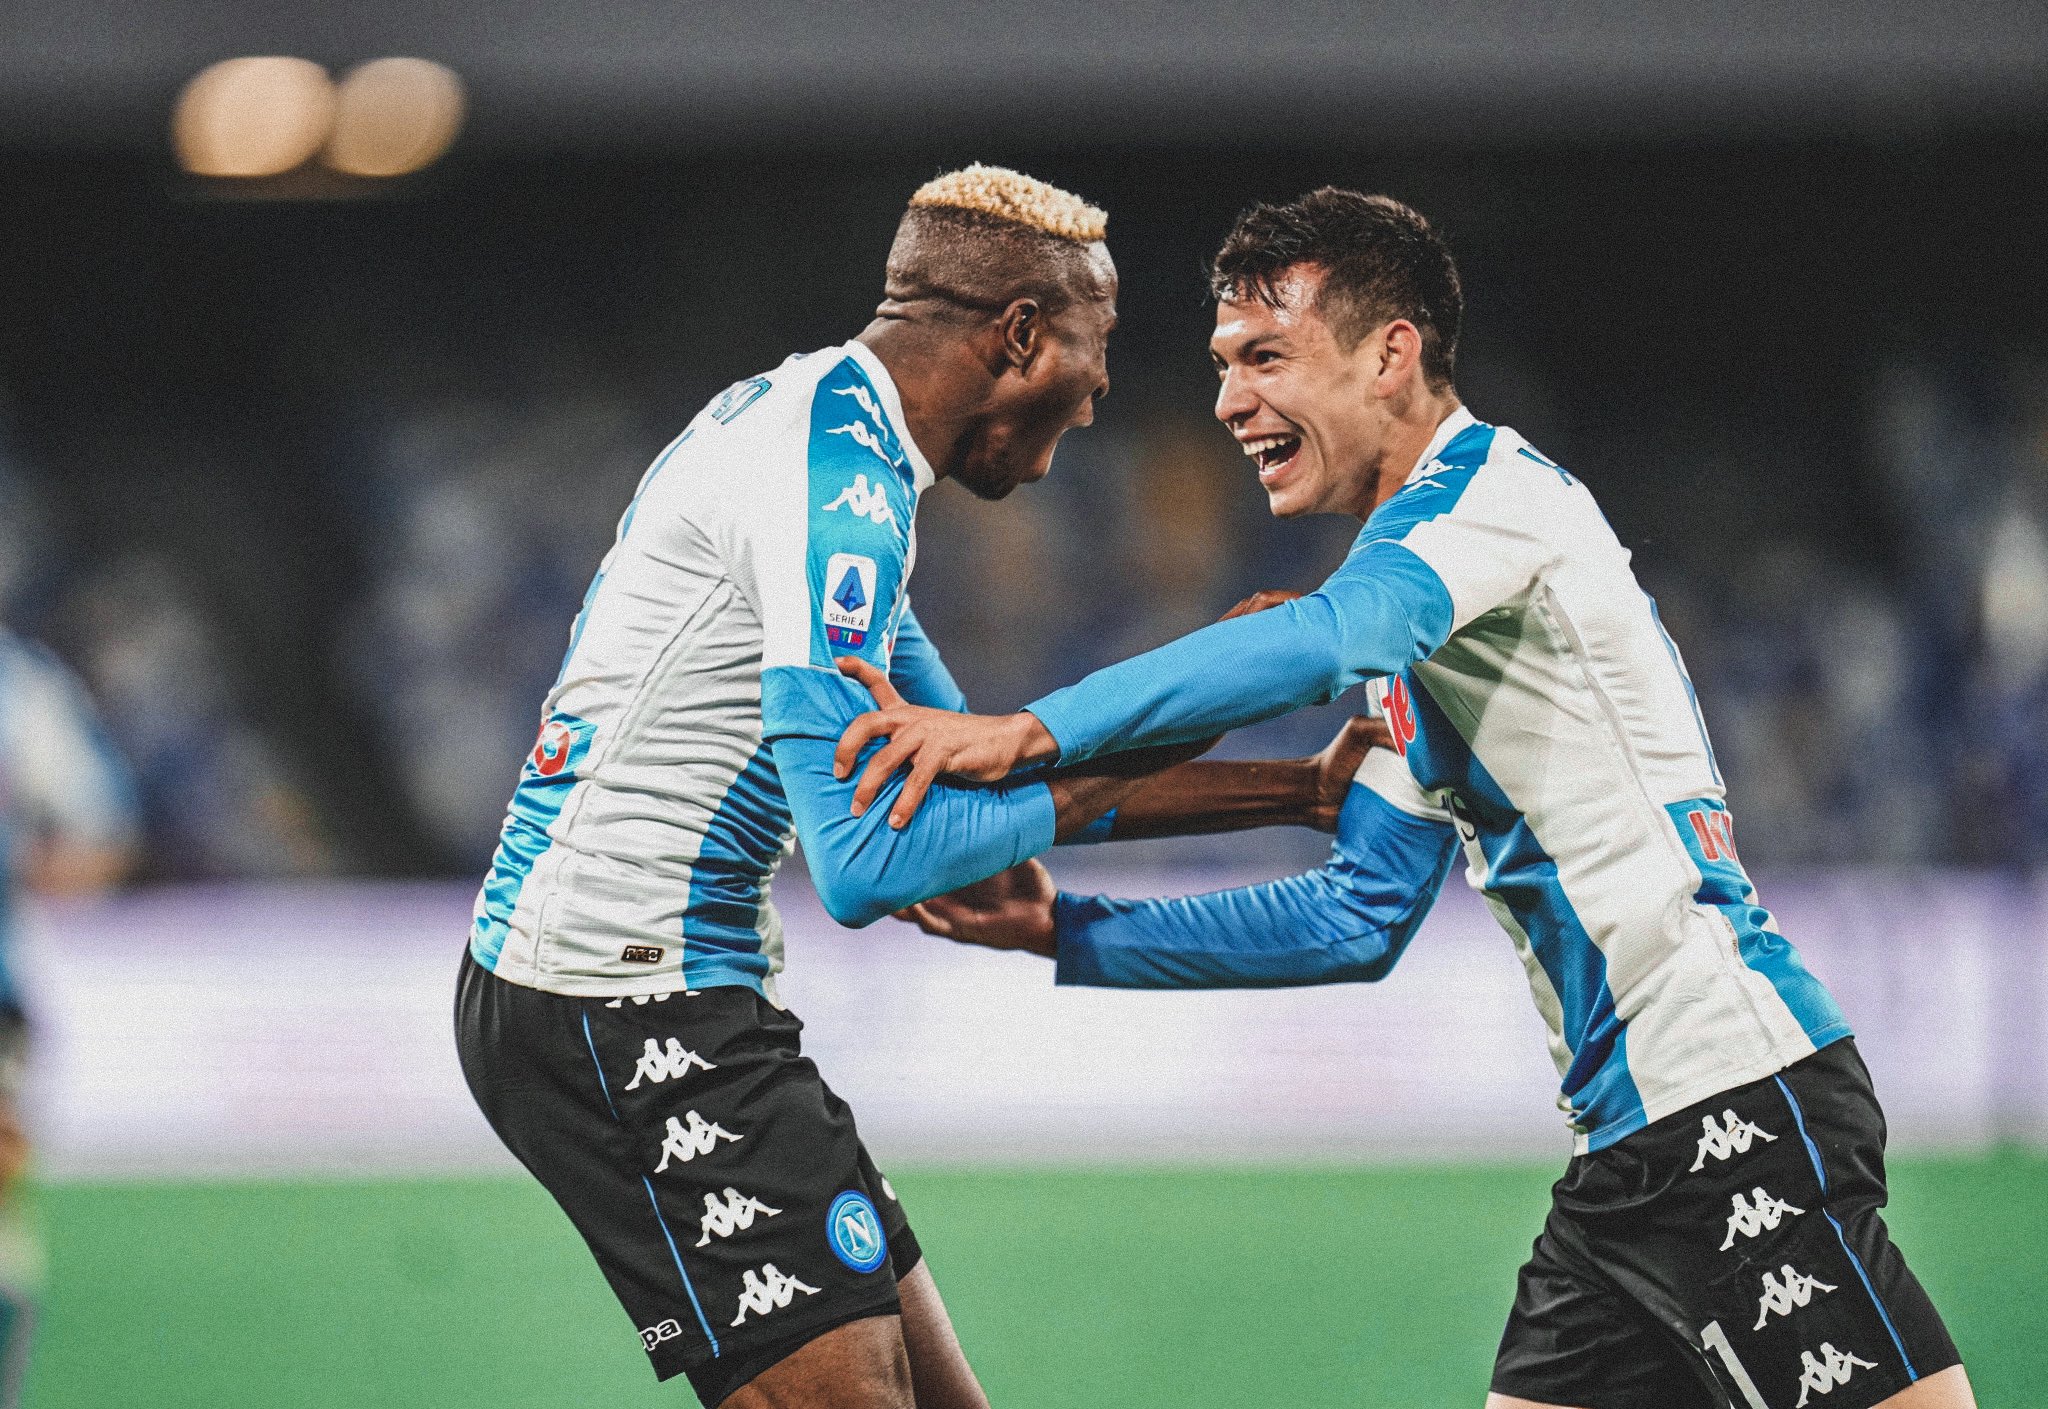 Osimhen Already Proving His Worth At Napoli- Agent